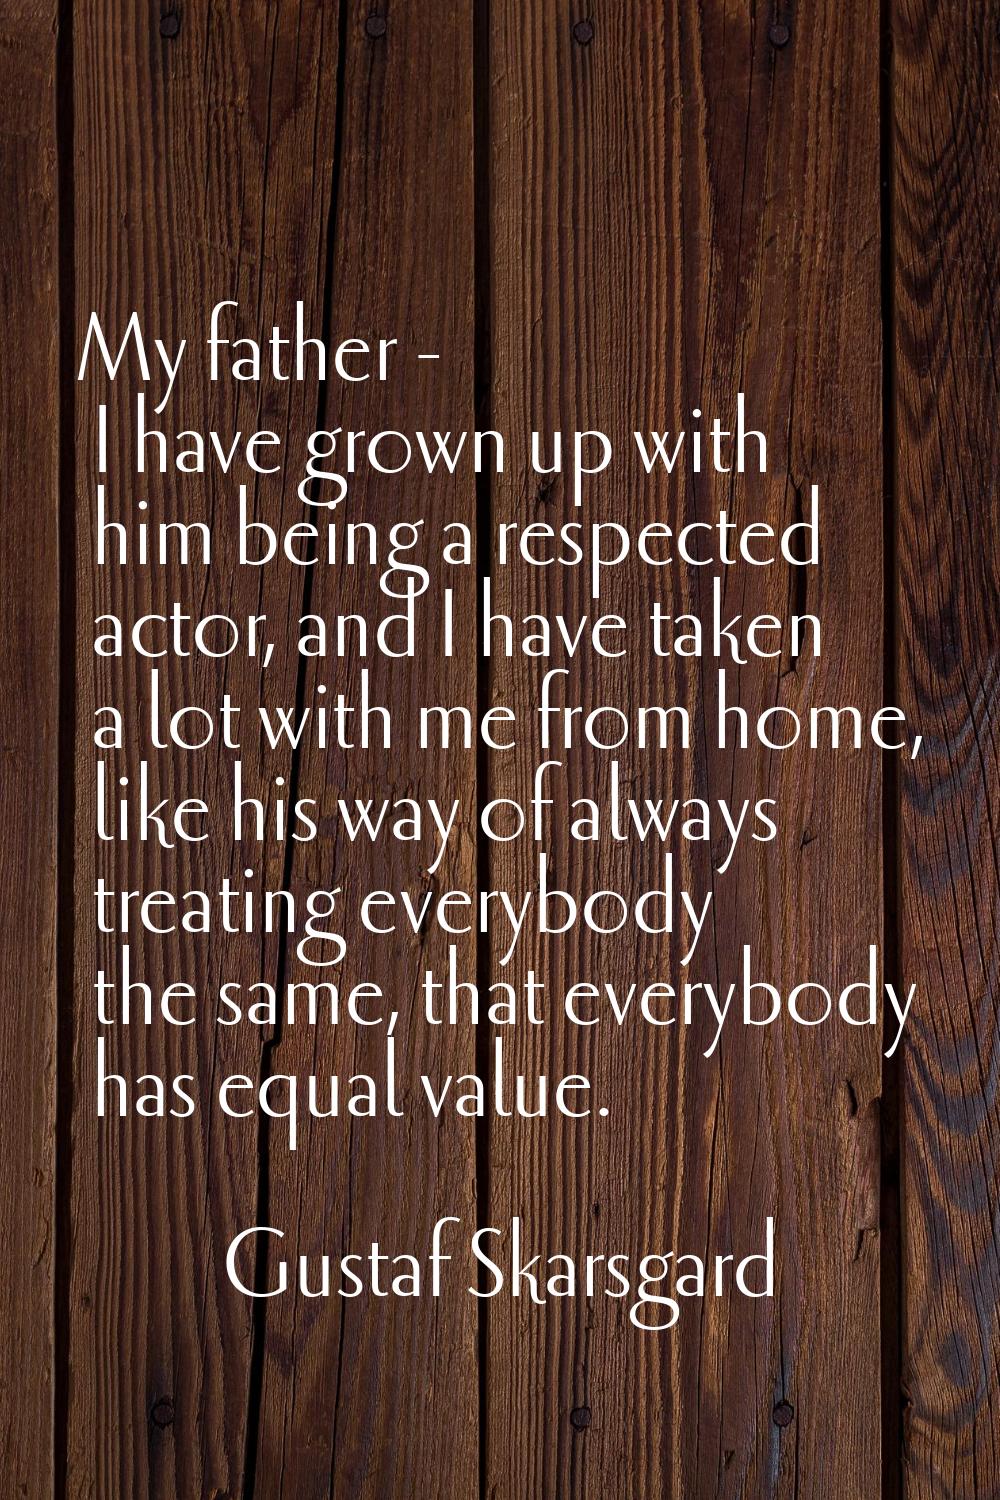 My father - I have grown up with him being a respected actor, and I have taken a lot with me from h